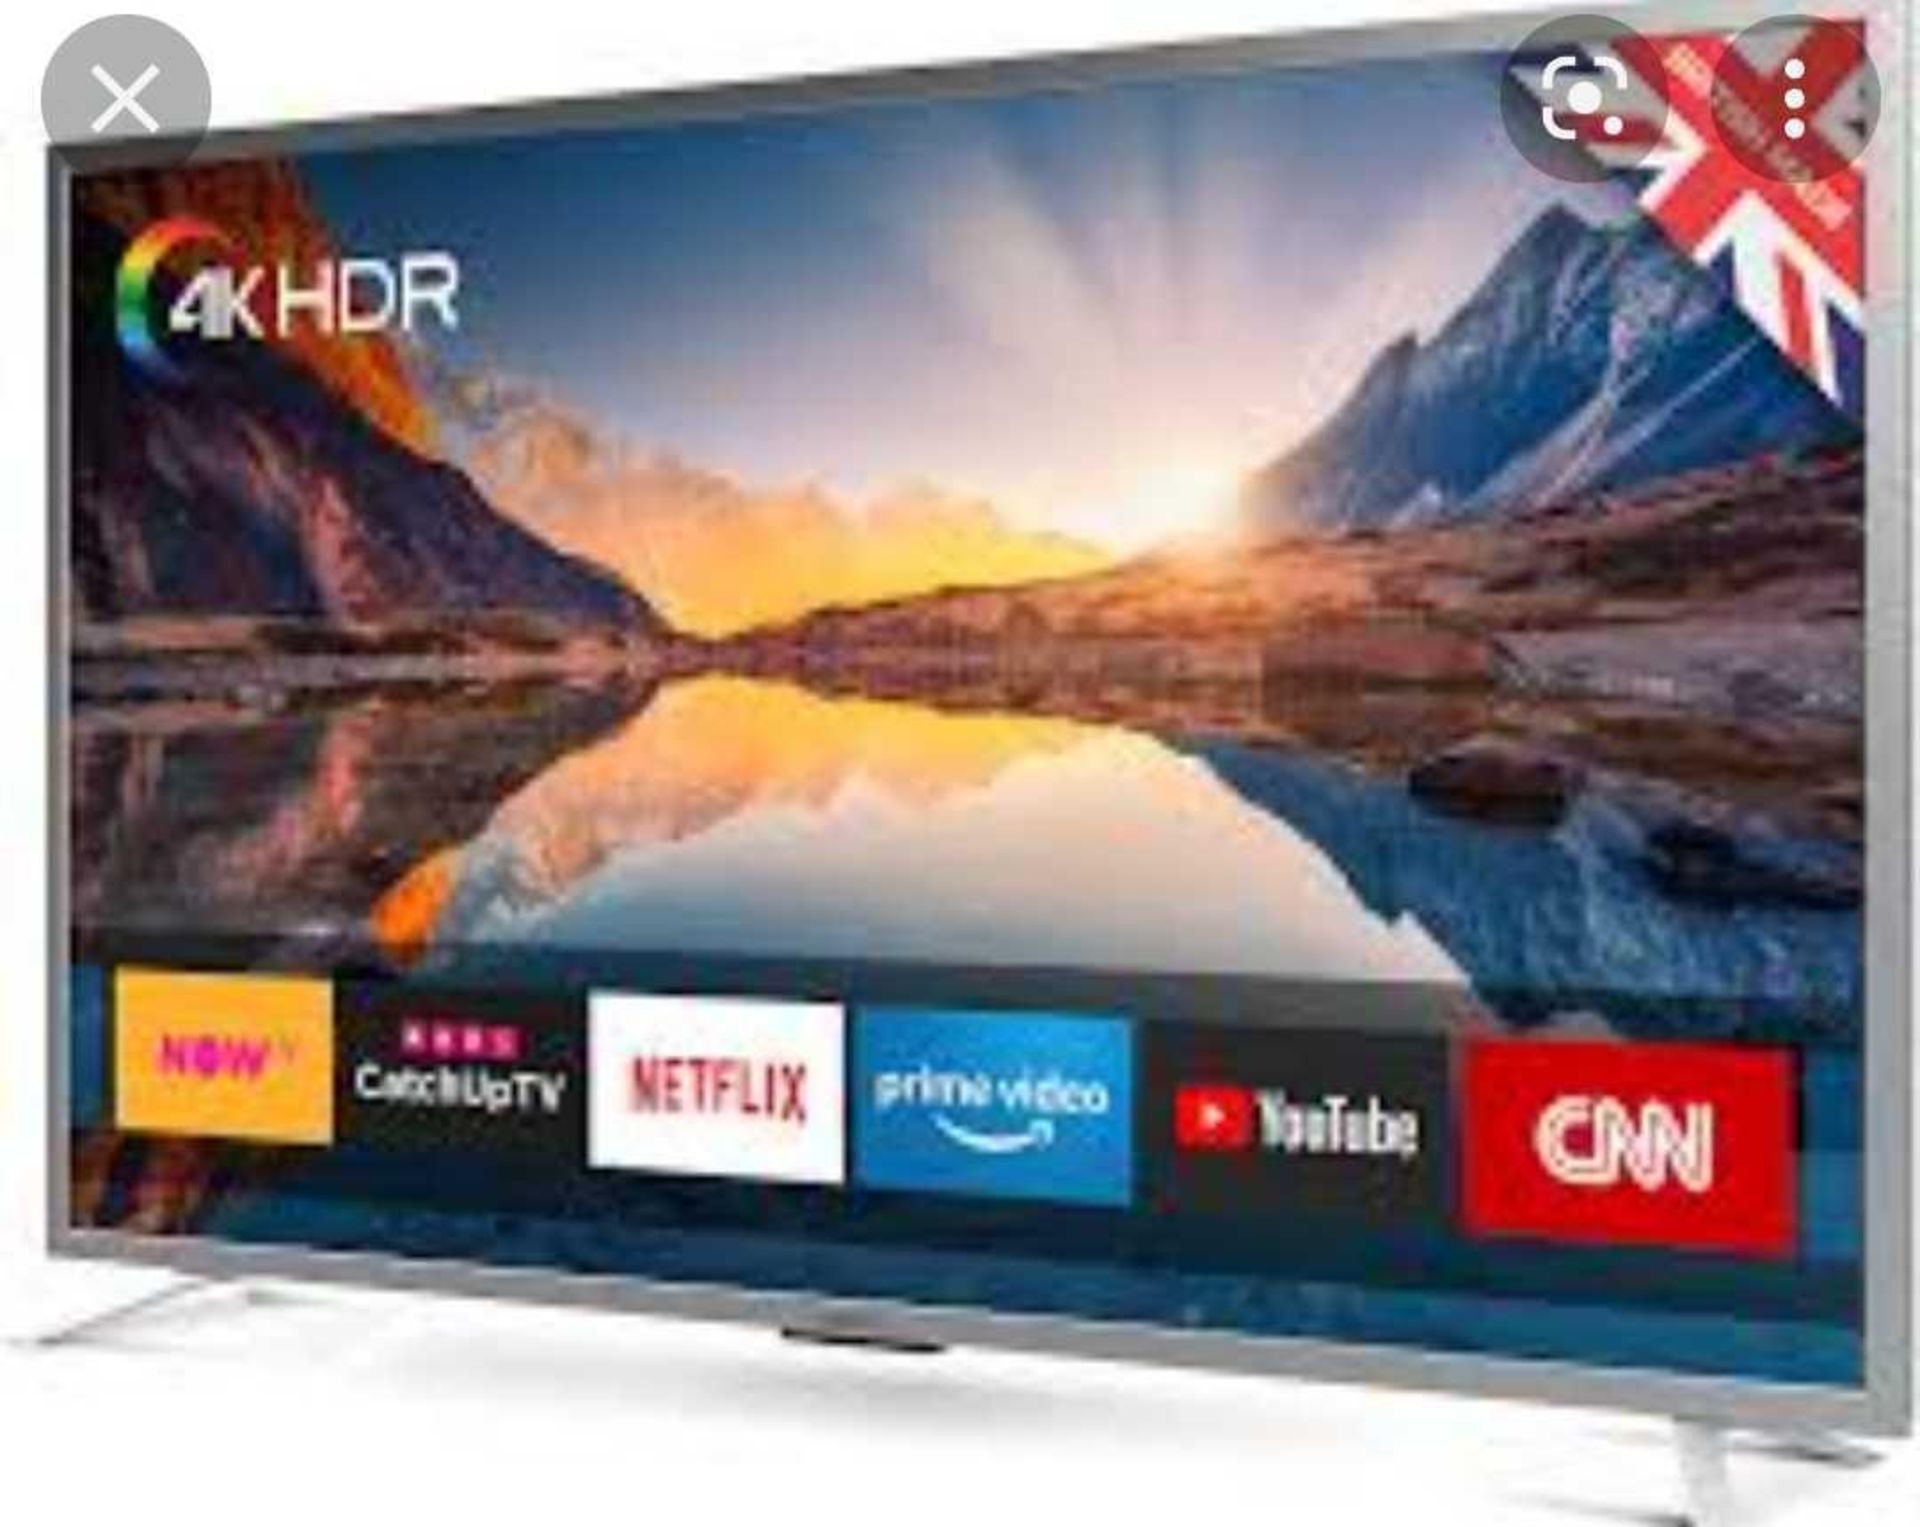 RRP £1500 Boxed Cello C75Sfs4K 75" Smart 4K Uhd Android Superfast Tv